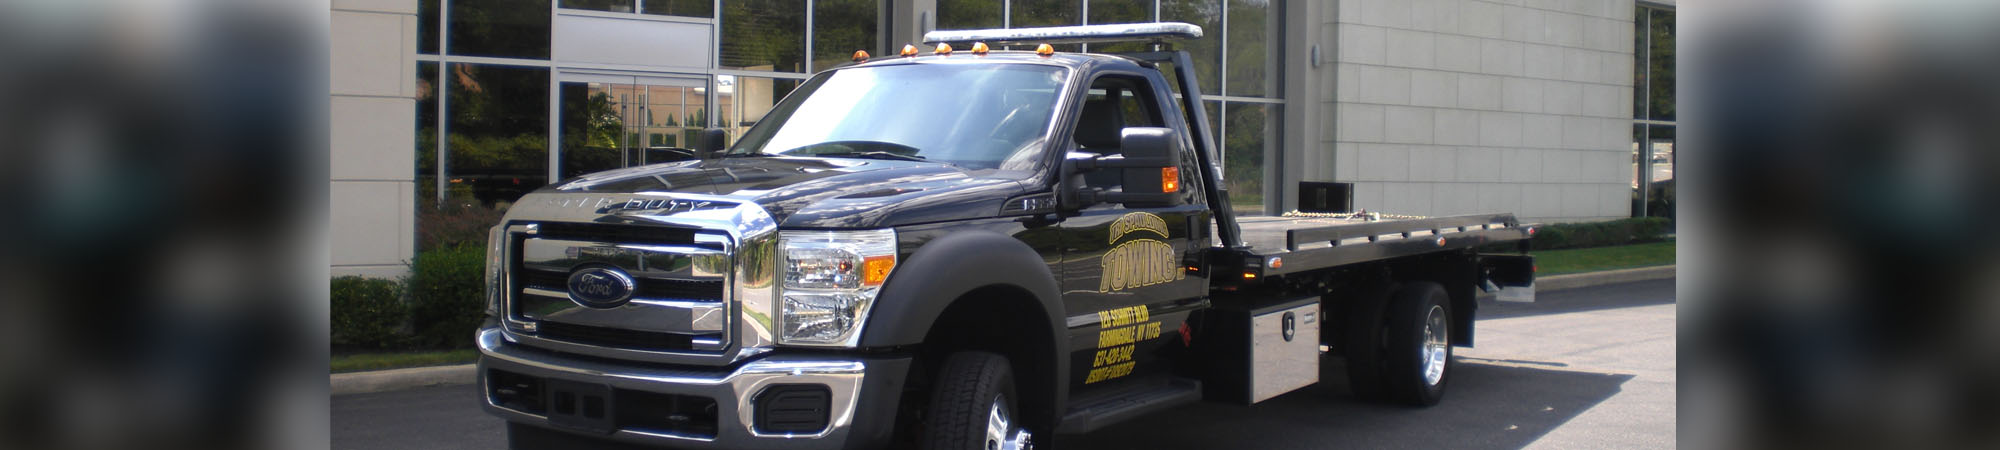 Quality towing services in Farmingdale, NY. 